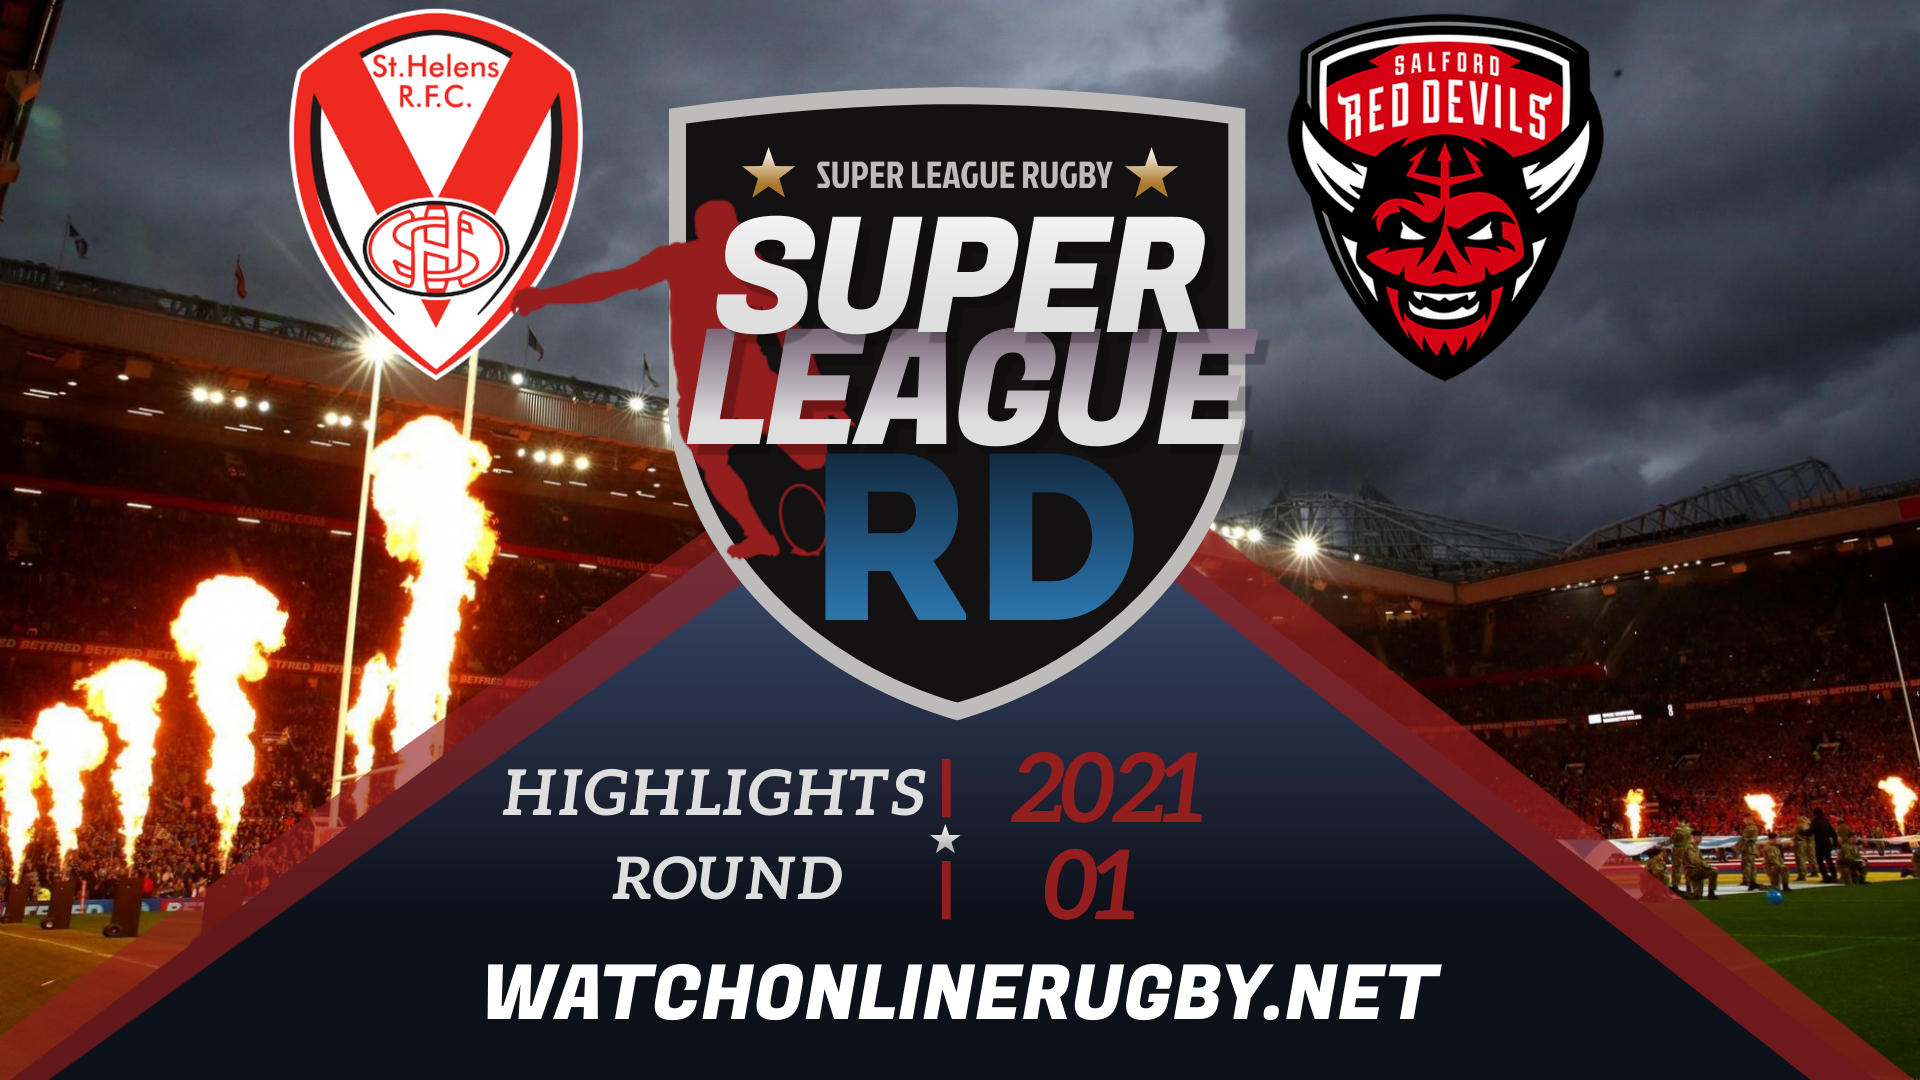 ST Helens Vs Salford Red Devils Super League Rugby 2021 RD 1